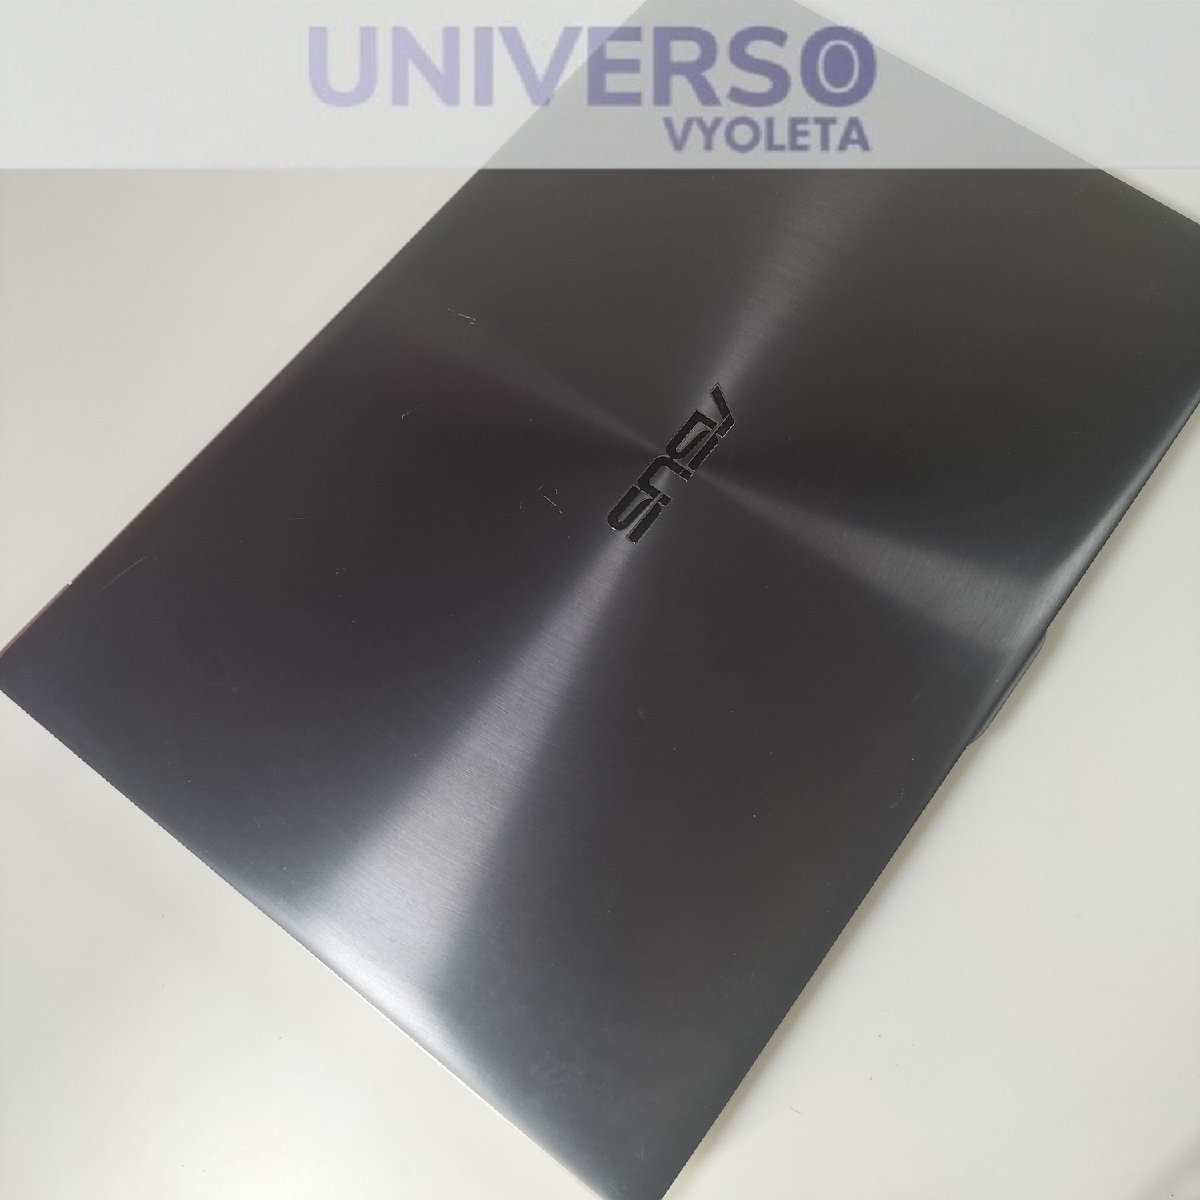 ASUS UX32V NoteBook PC_3